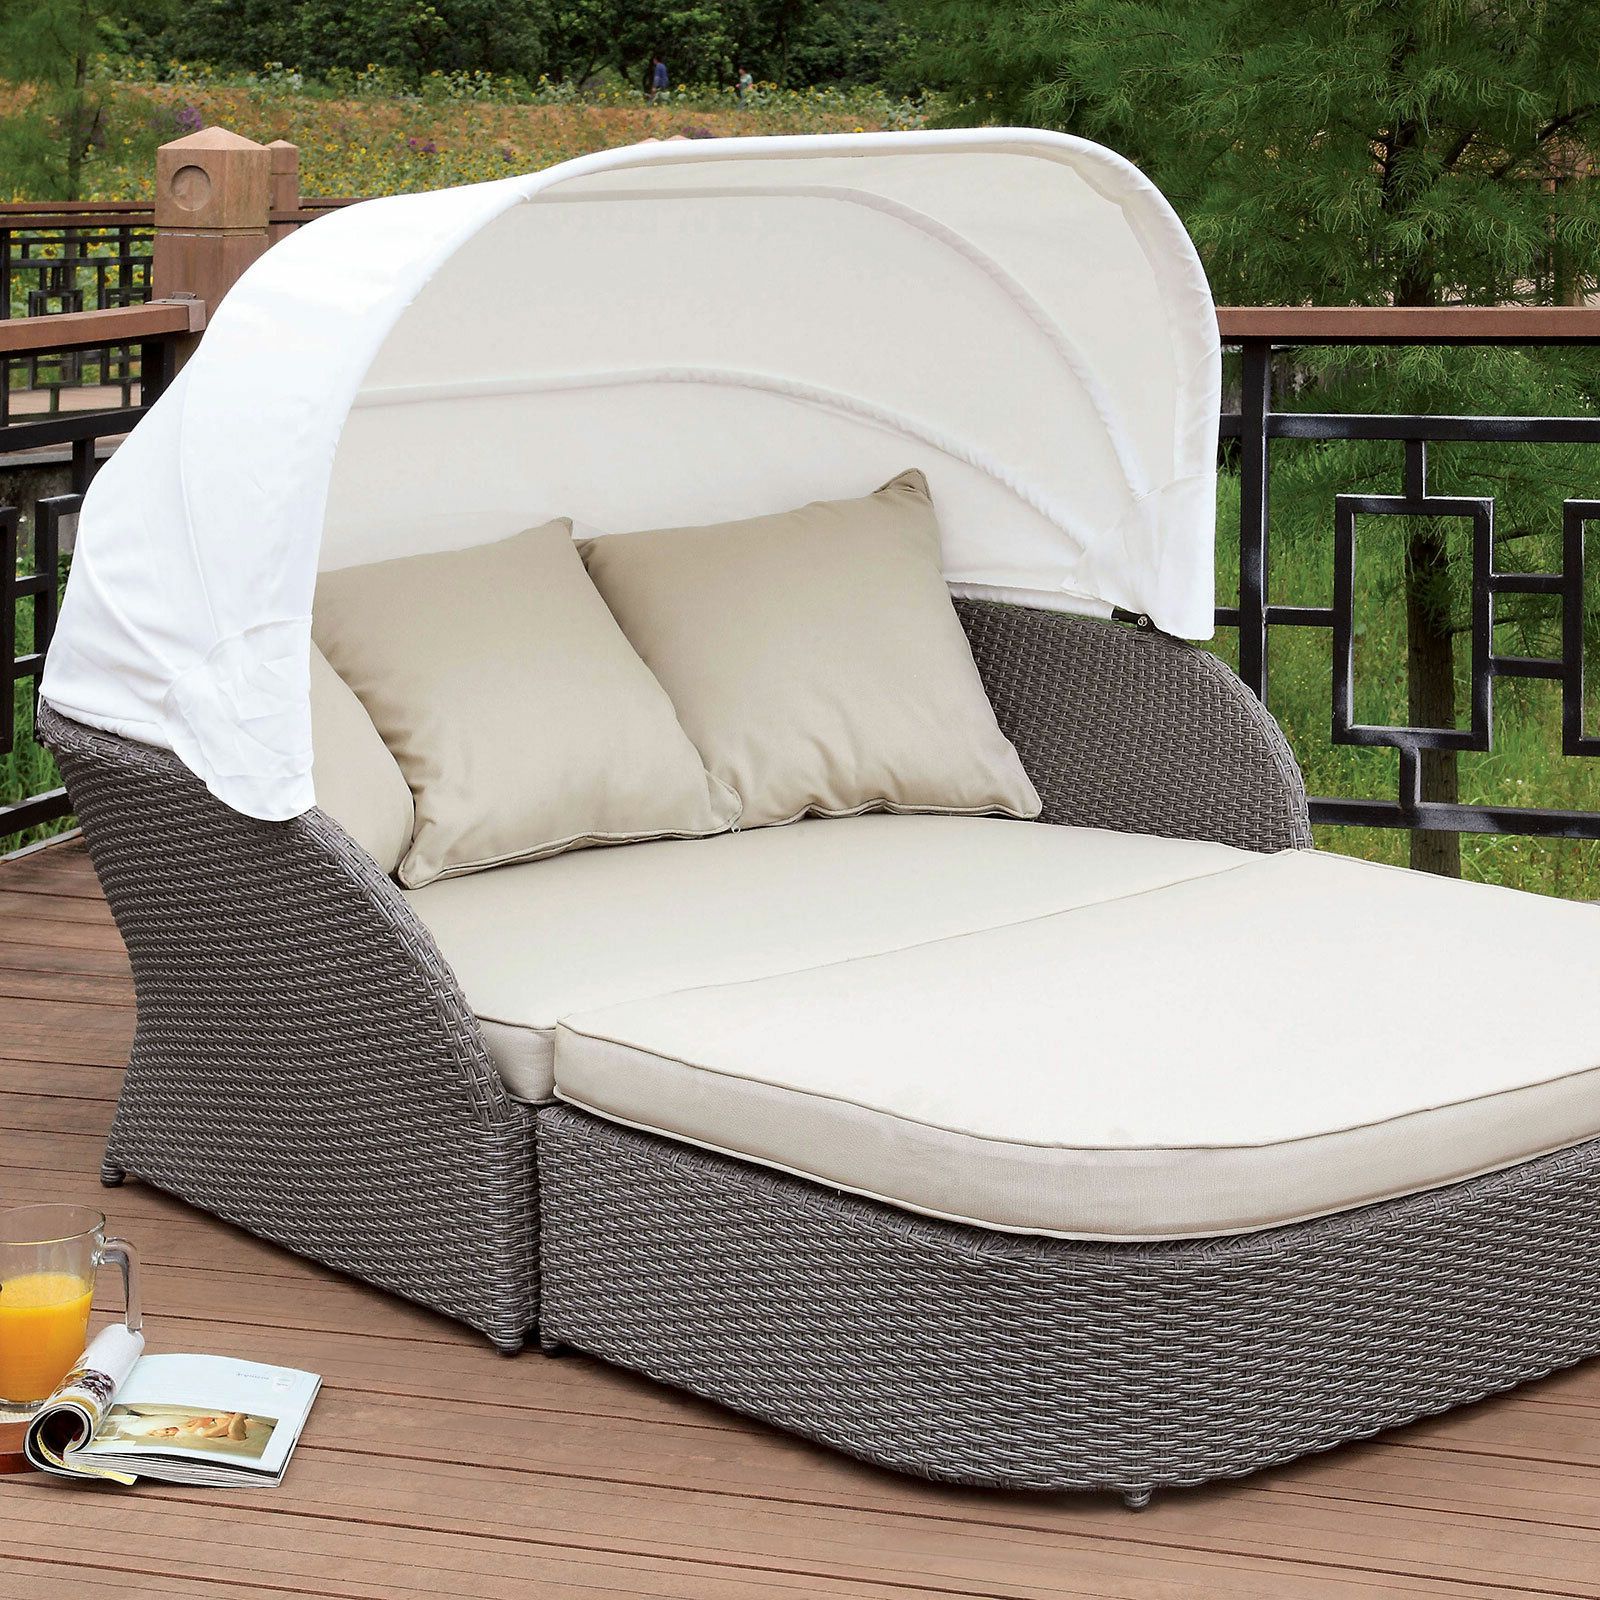 Naperville Patio Daybeds With Cushion Regarding Best And Newest Coronado Patio Daybed With Cushions (View 18 of 25)